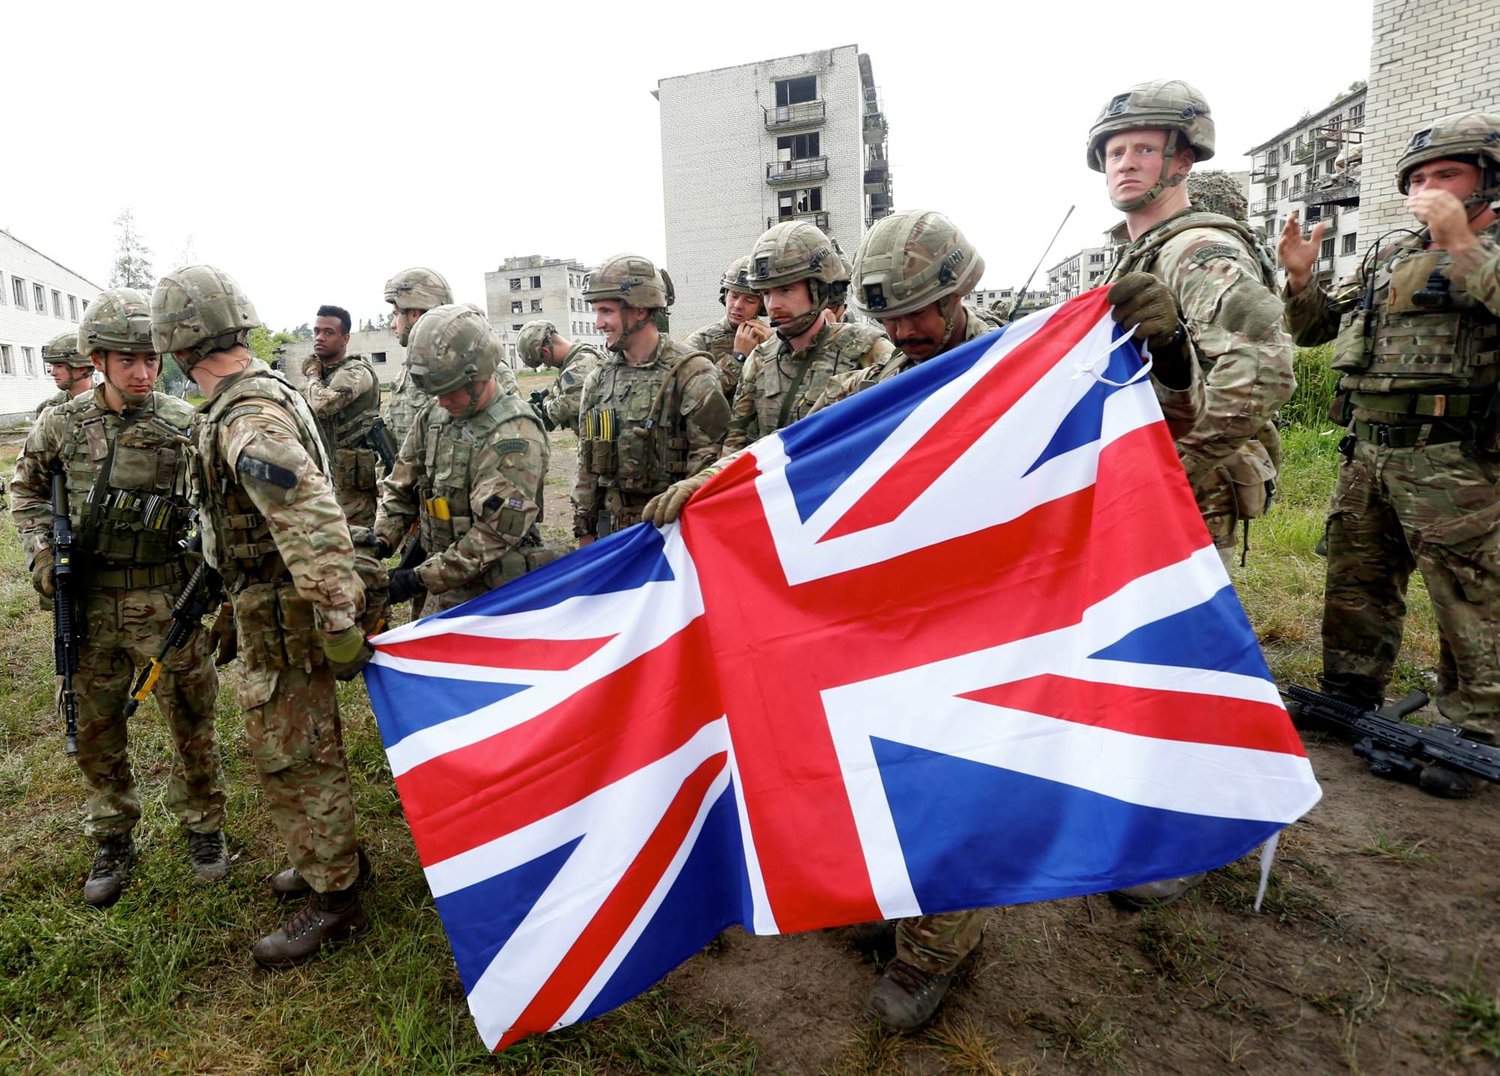 British servicemen hold Union Jack after the UK-led Joint Expeditionary Force (JEF) military exercise Baltic Protector 2019 in the former Soviet military town near Skrunda, Latvia July 2, 2019. FILE: REUTERS/Ints Kalnins Acquire Licensing Rights

